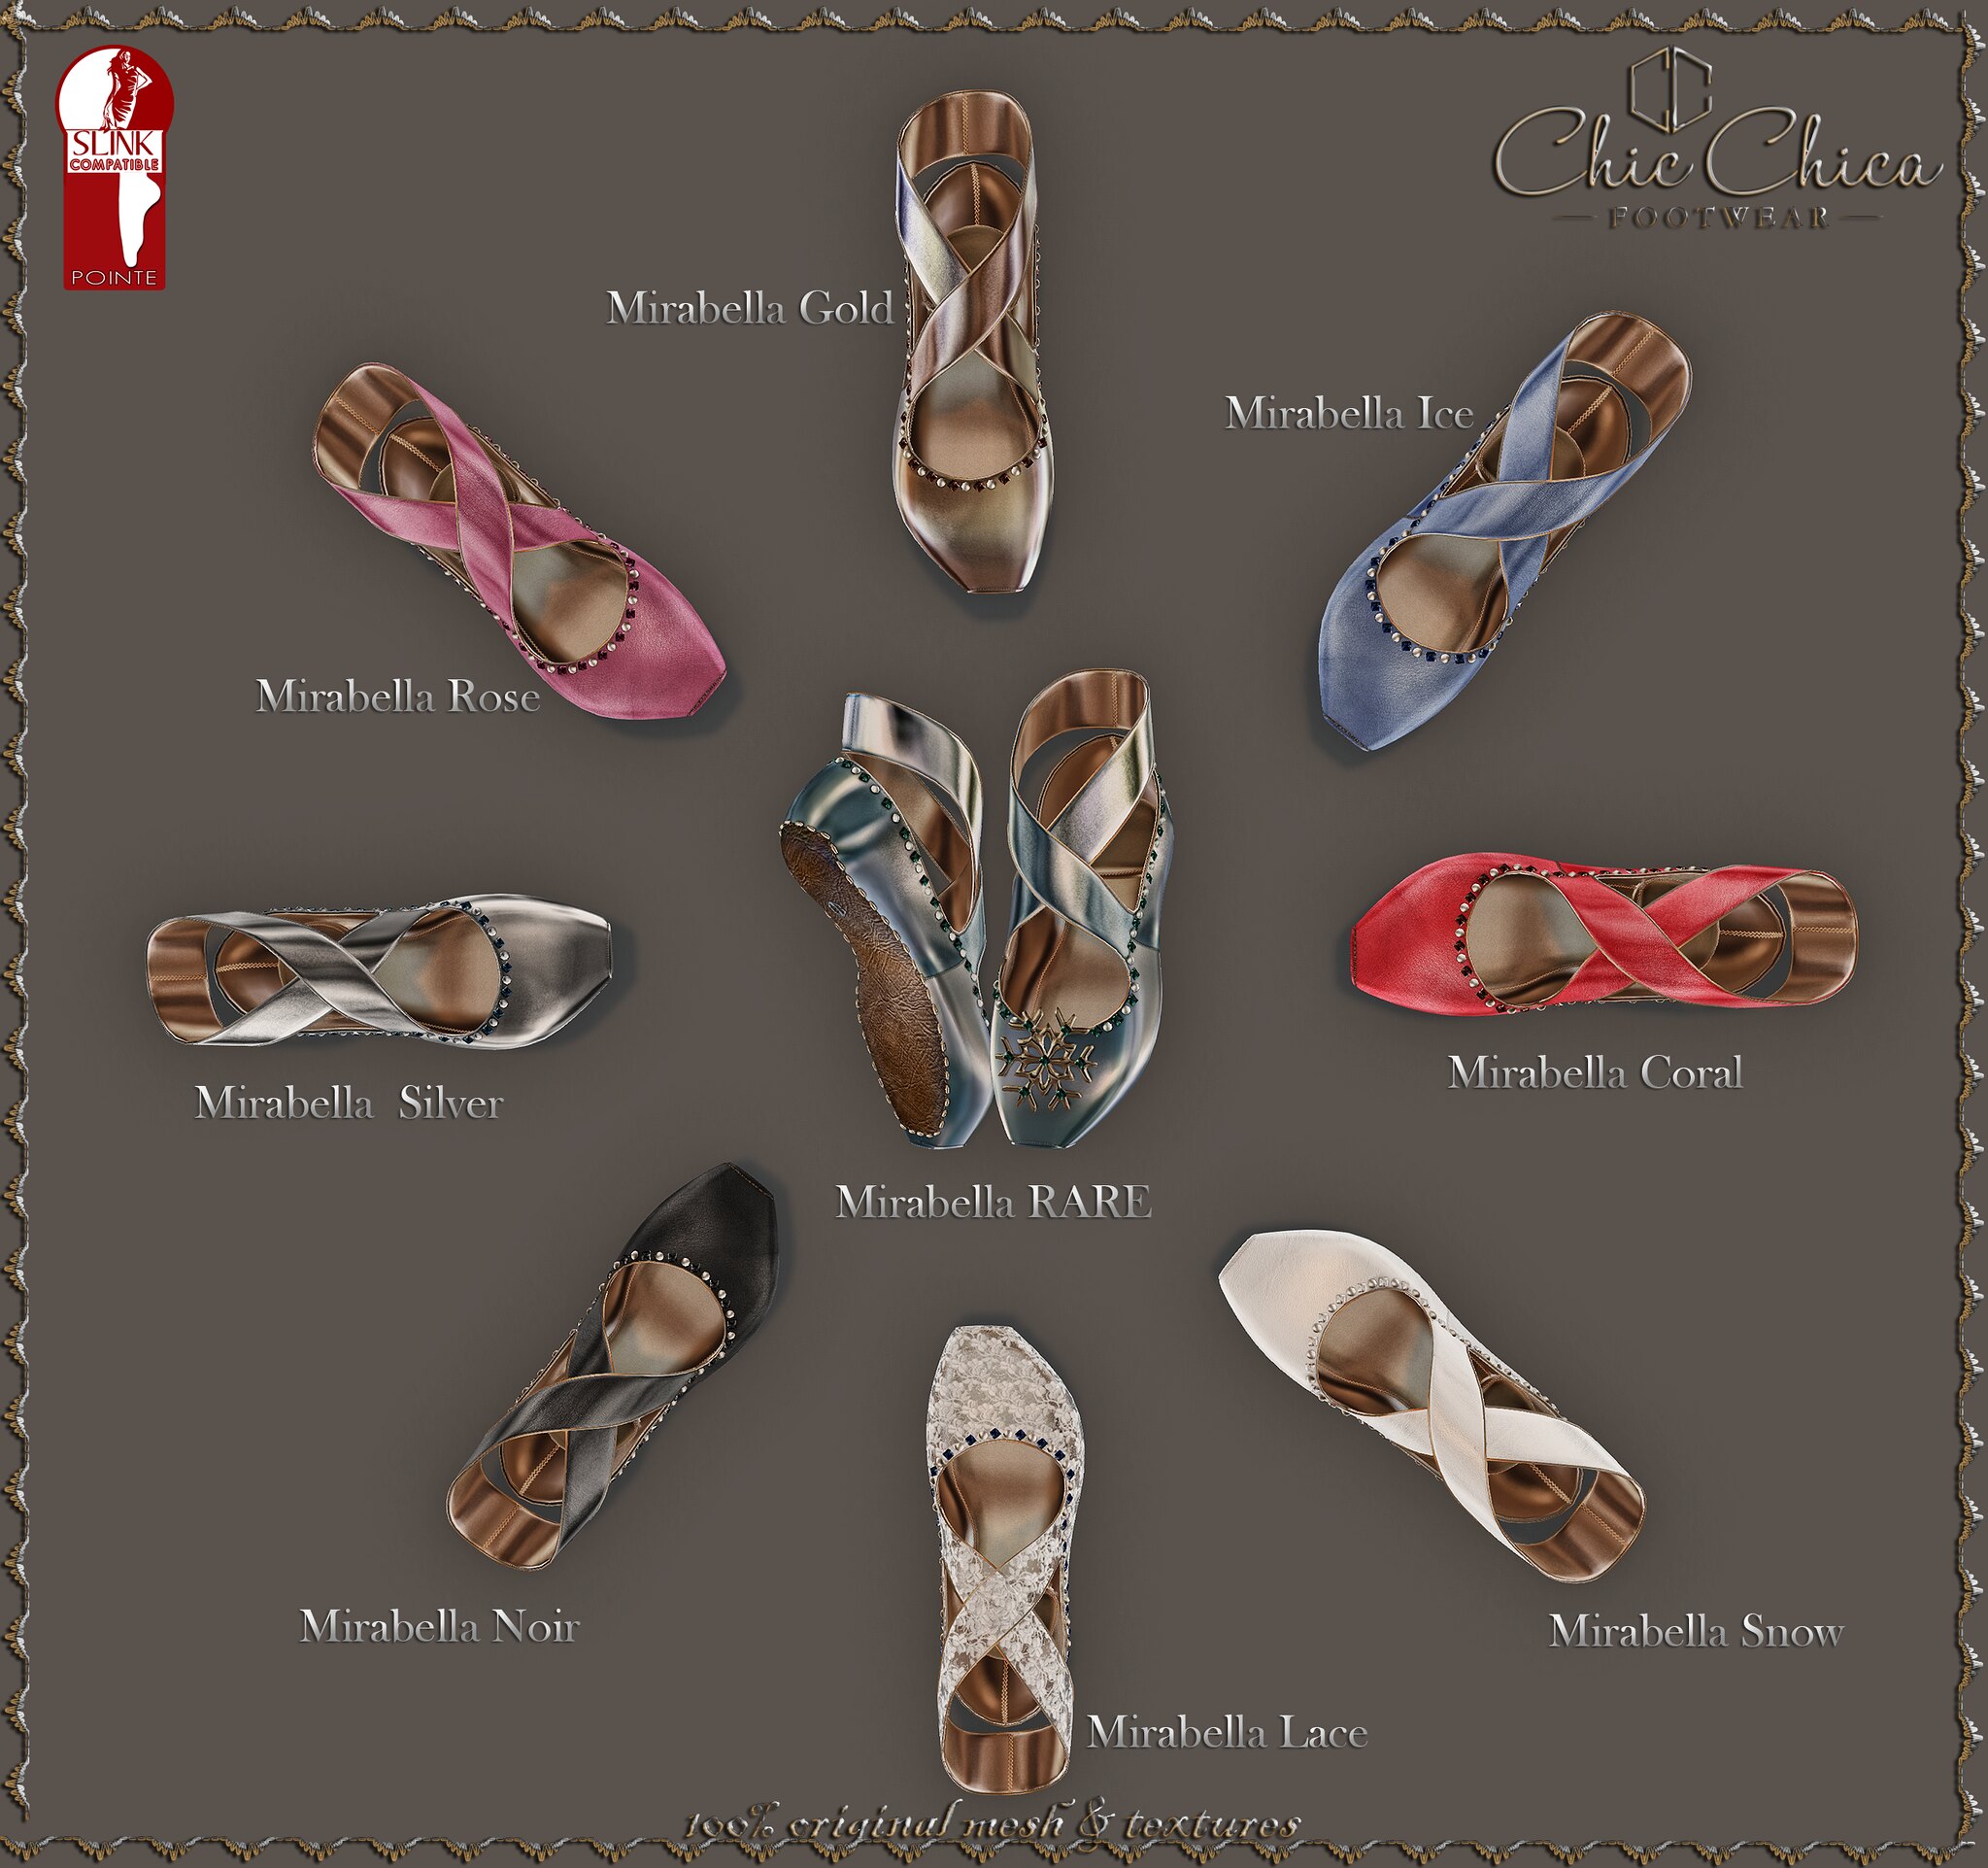 Mirabella ballets by ChicChica for TLC